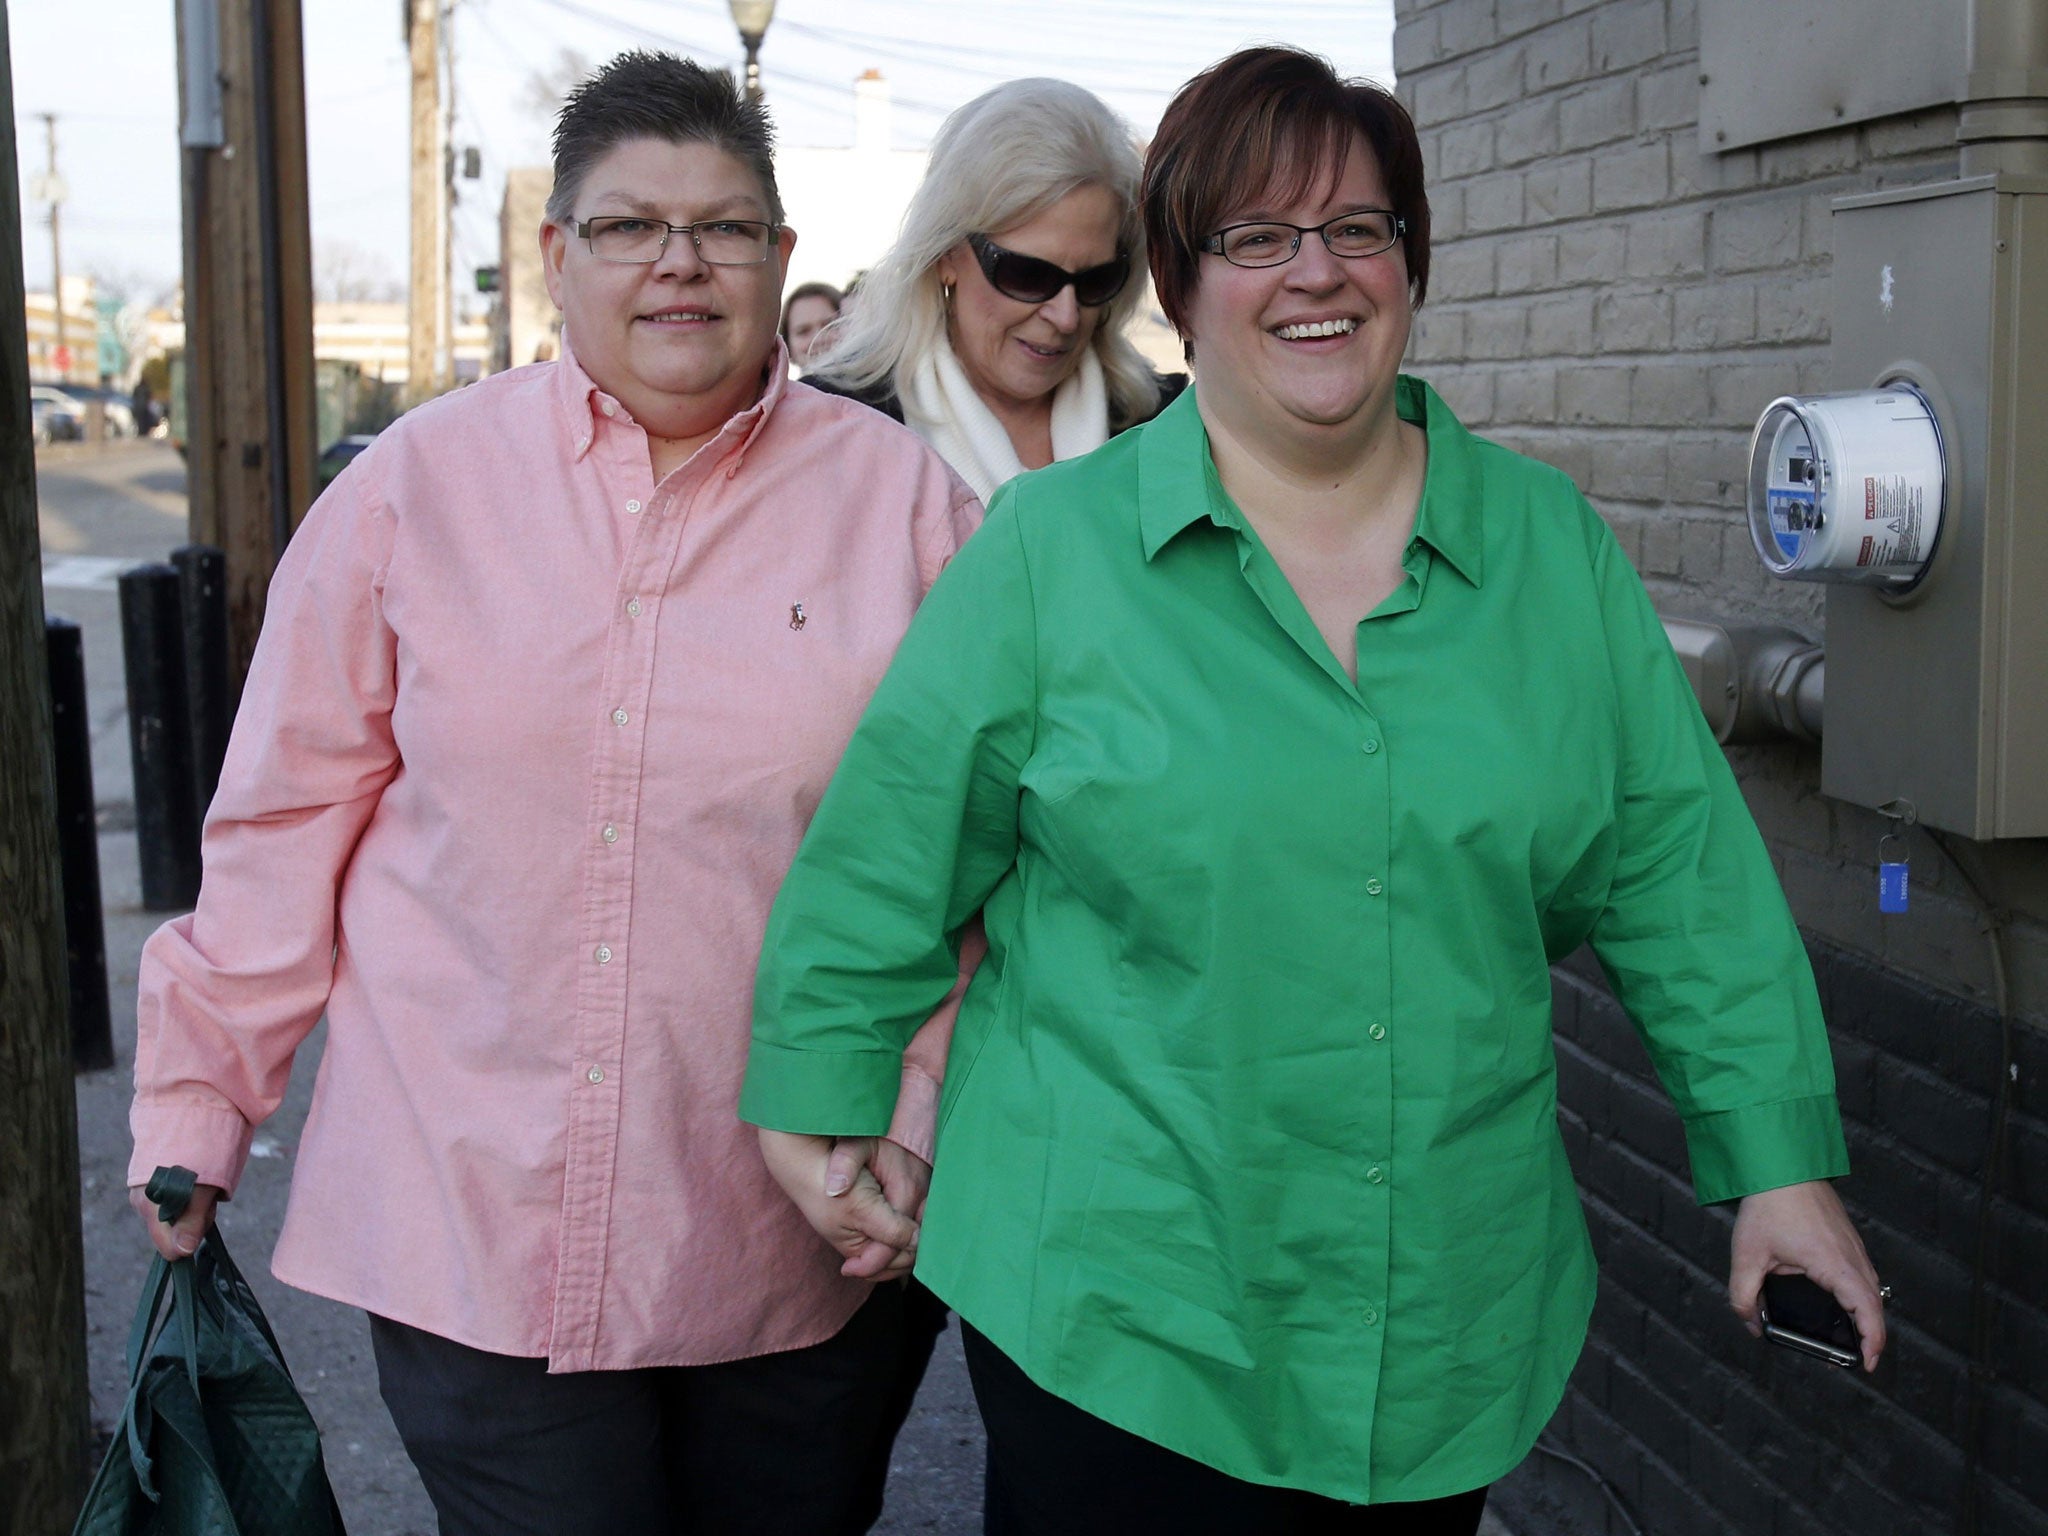 Plaintiffs April DeBoer (R) and her partner Jayne Rowse hold hands as they arrive at the Affirmations Center for a news conference after a Michigan federal judge ruled that a ban on same-sex marriage violates the U.S. Constitution and must be overturned,